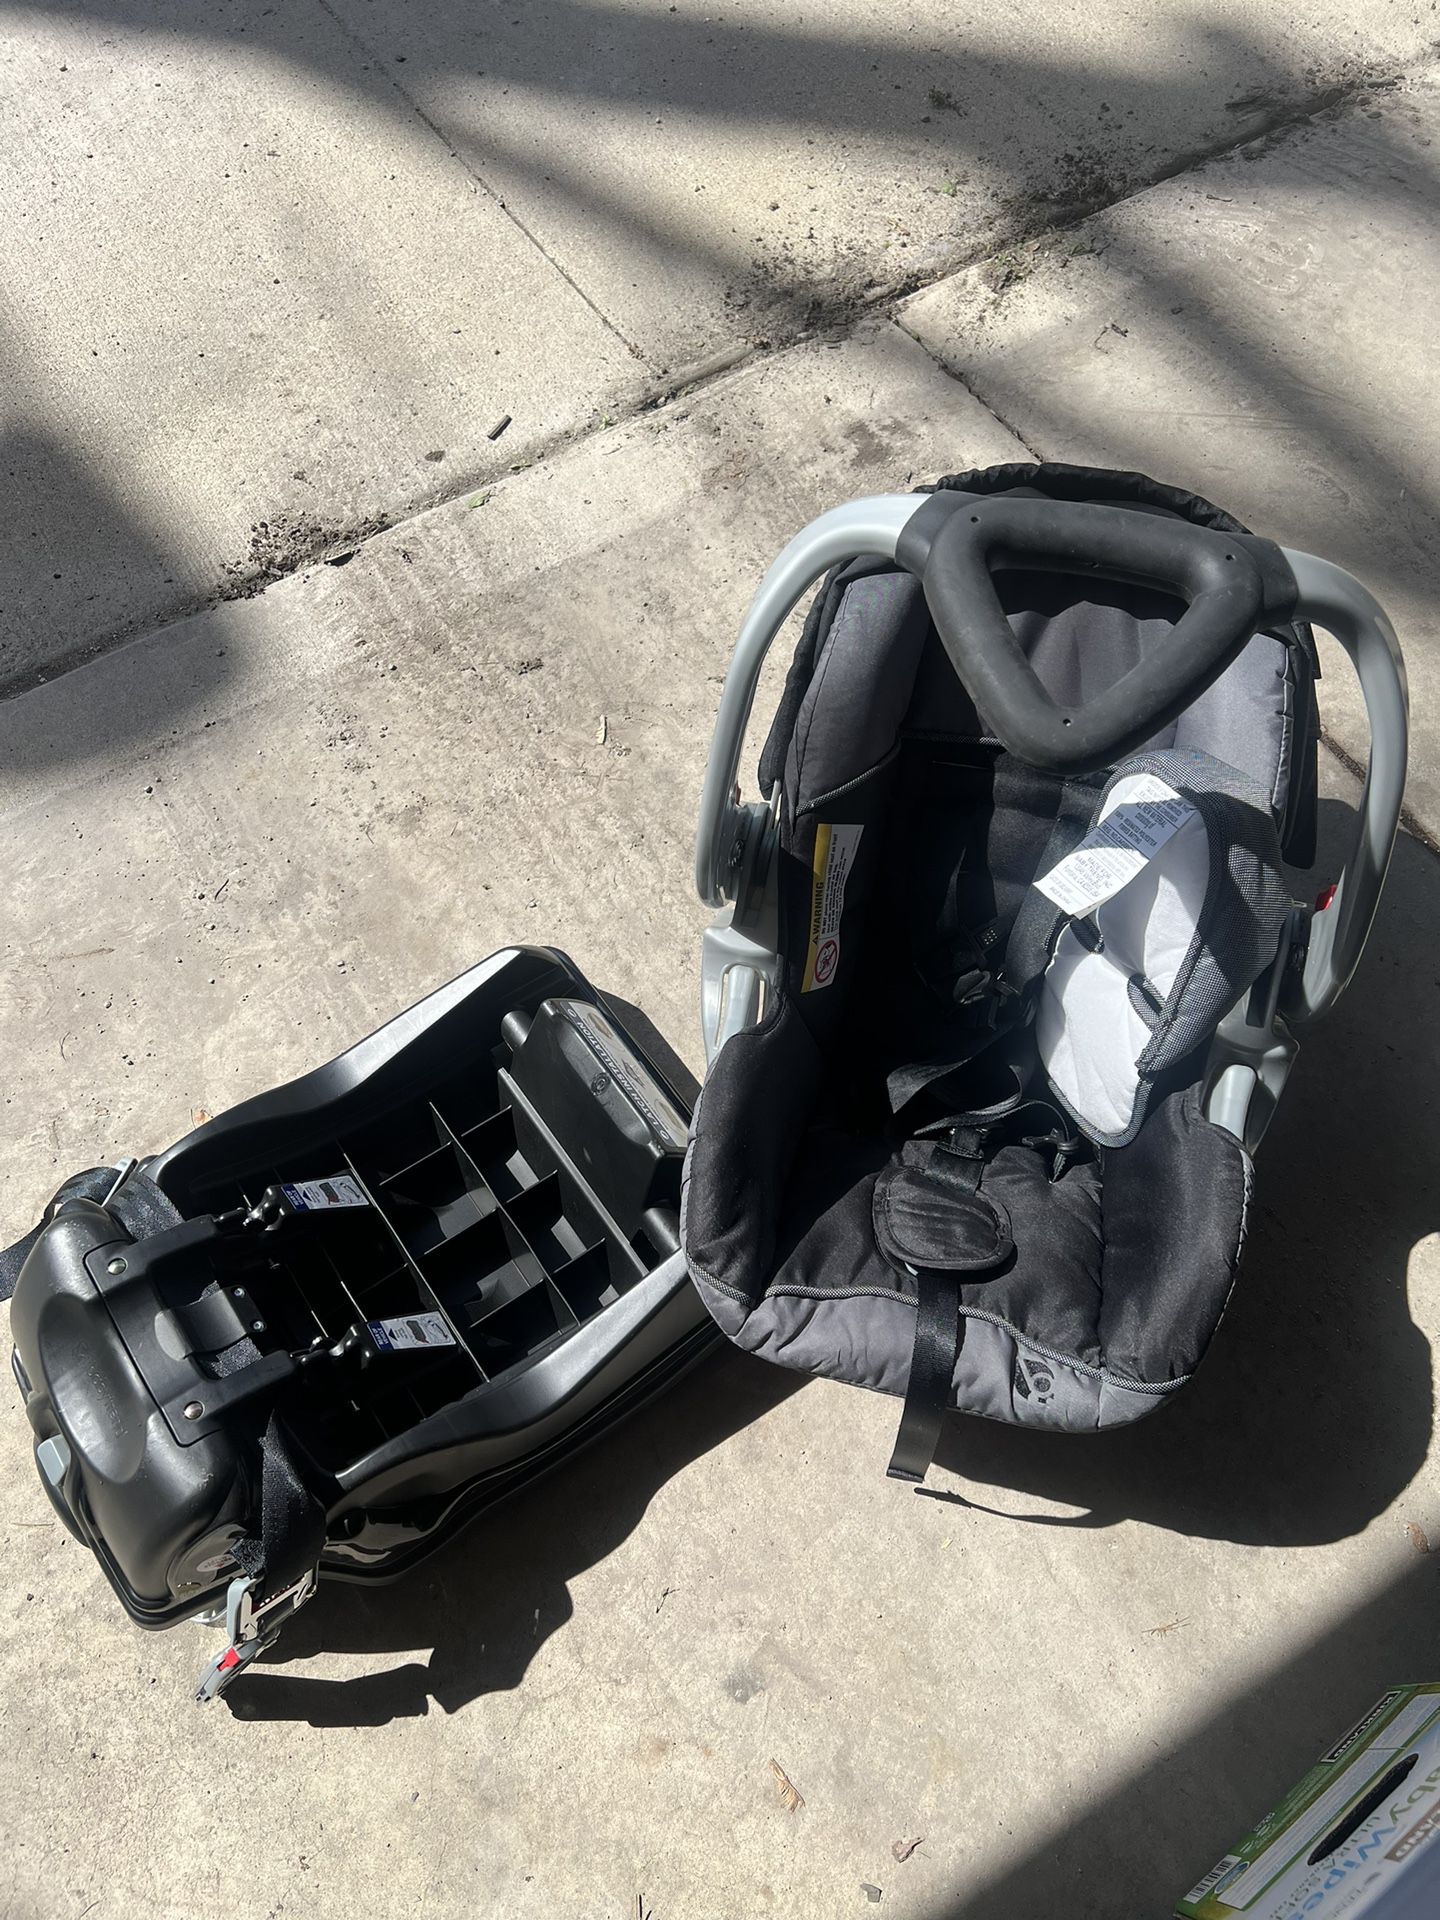 Infant Car Seat With Base 